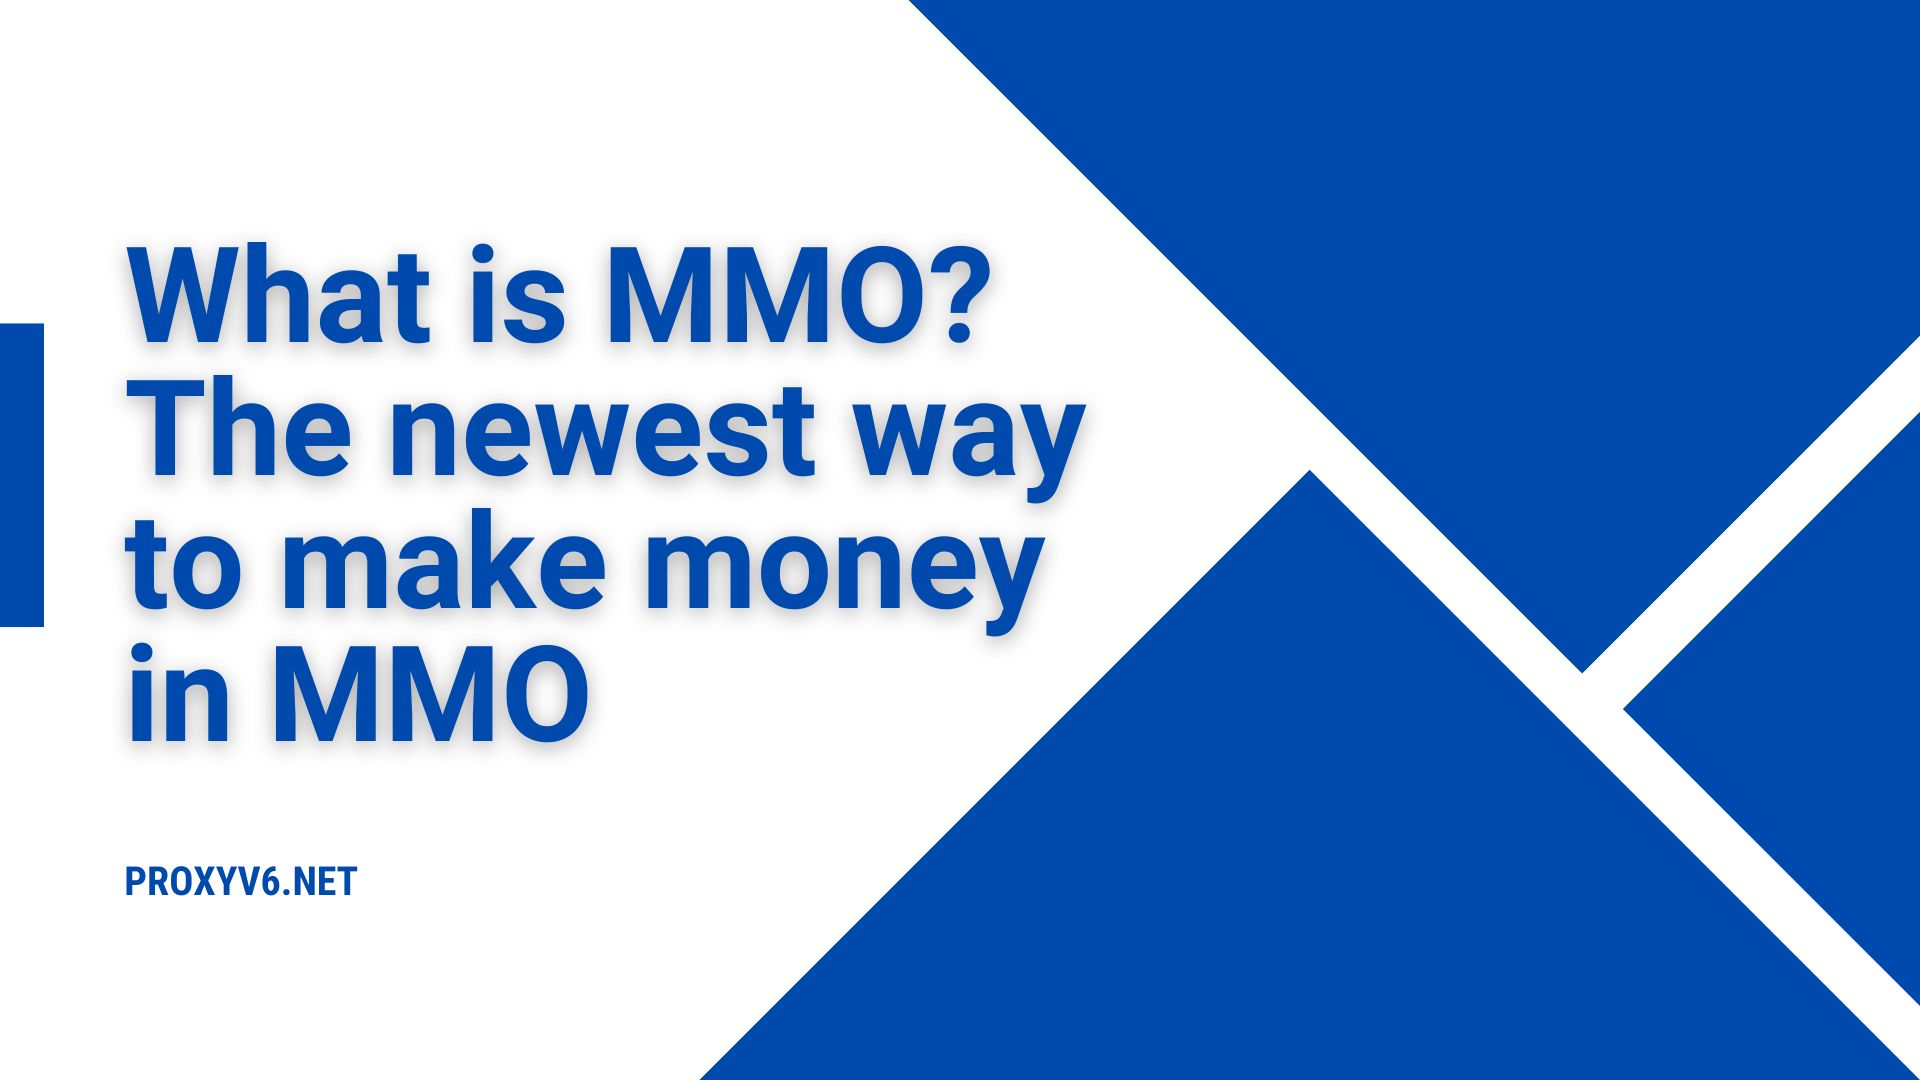 What is MMO? The newest way to make money in MMO